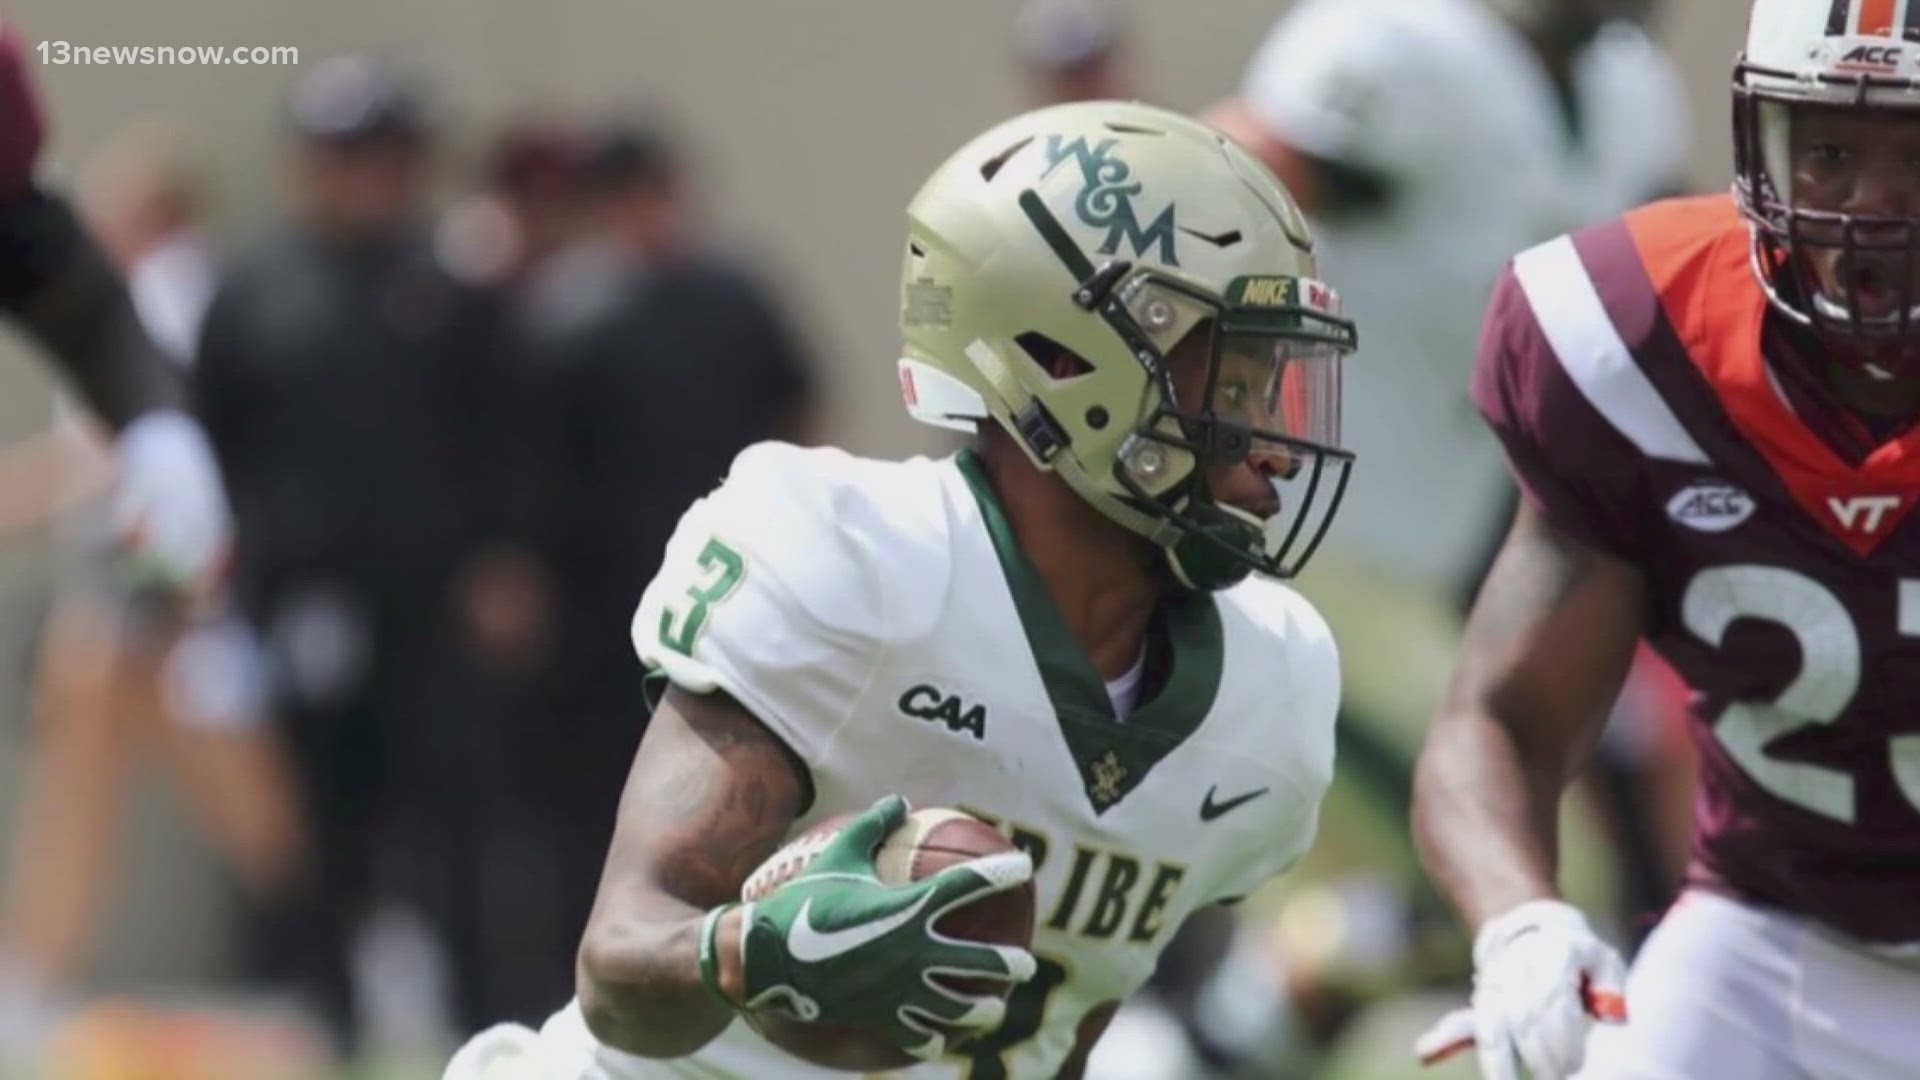 A trial began in Norfolk in the shooting death of a William and Mary football player in 2019. Keith Bryant is charged with killing Nate Evans.